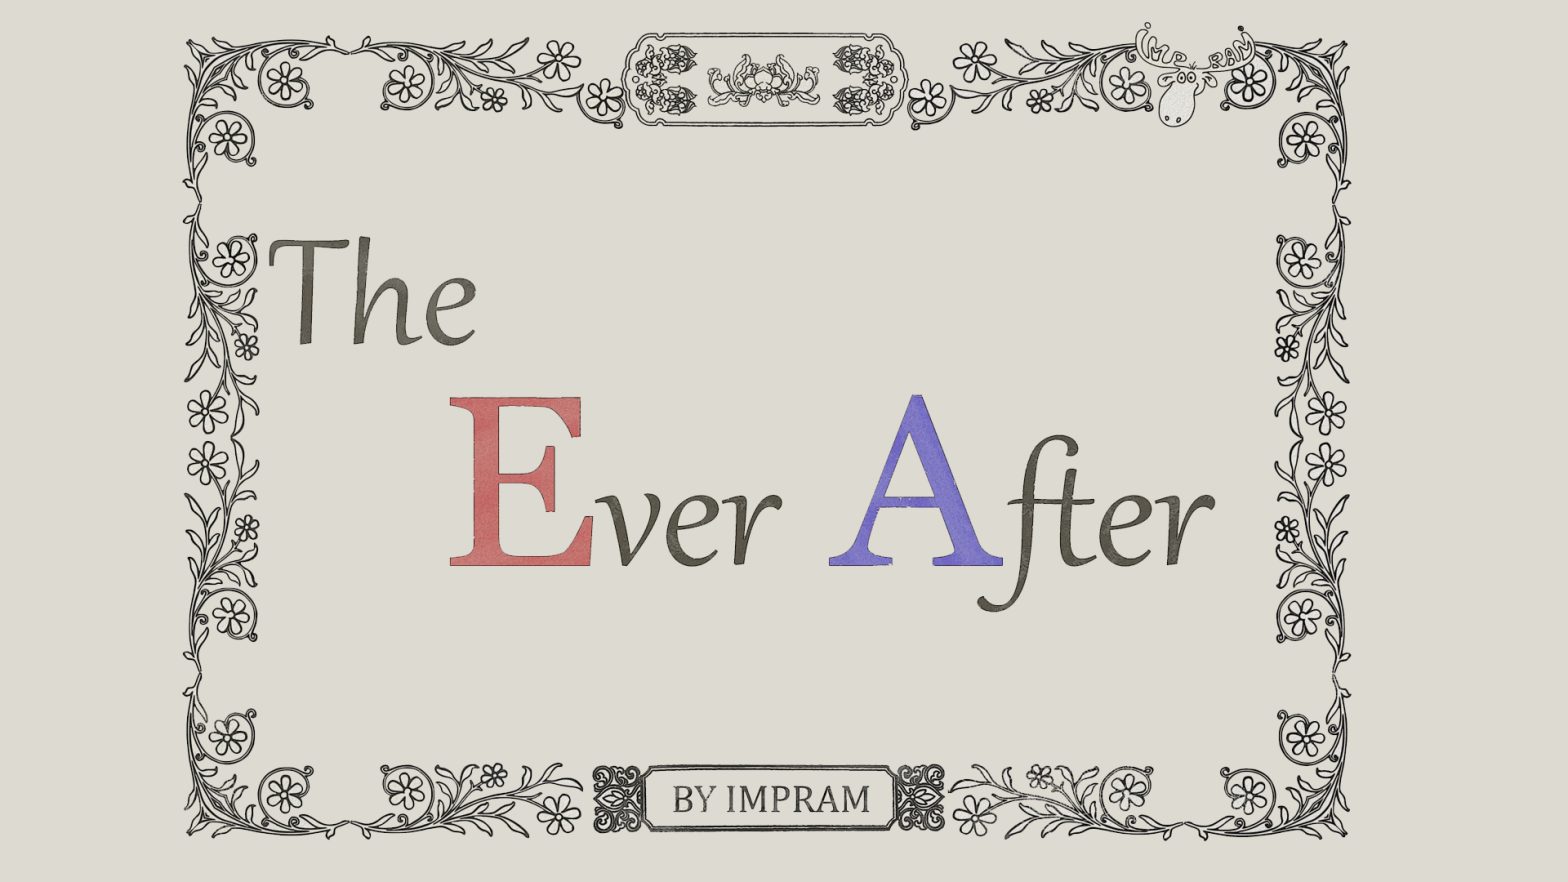 The Ever After